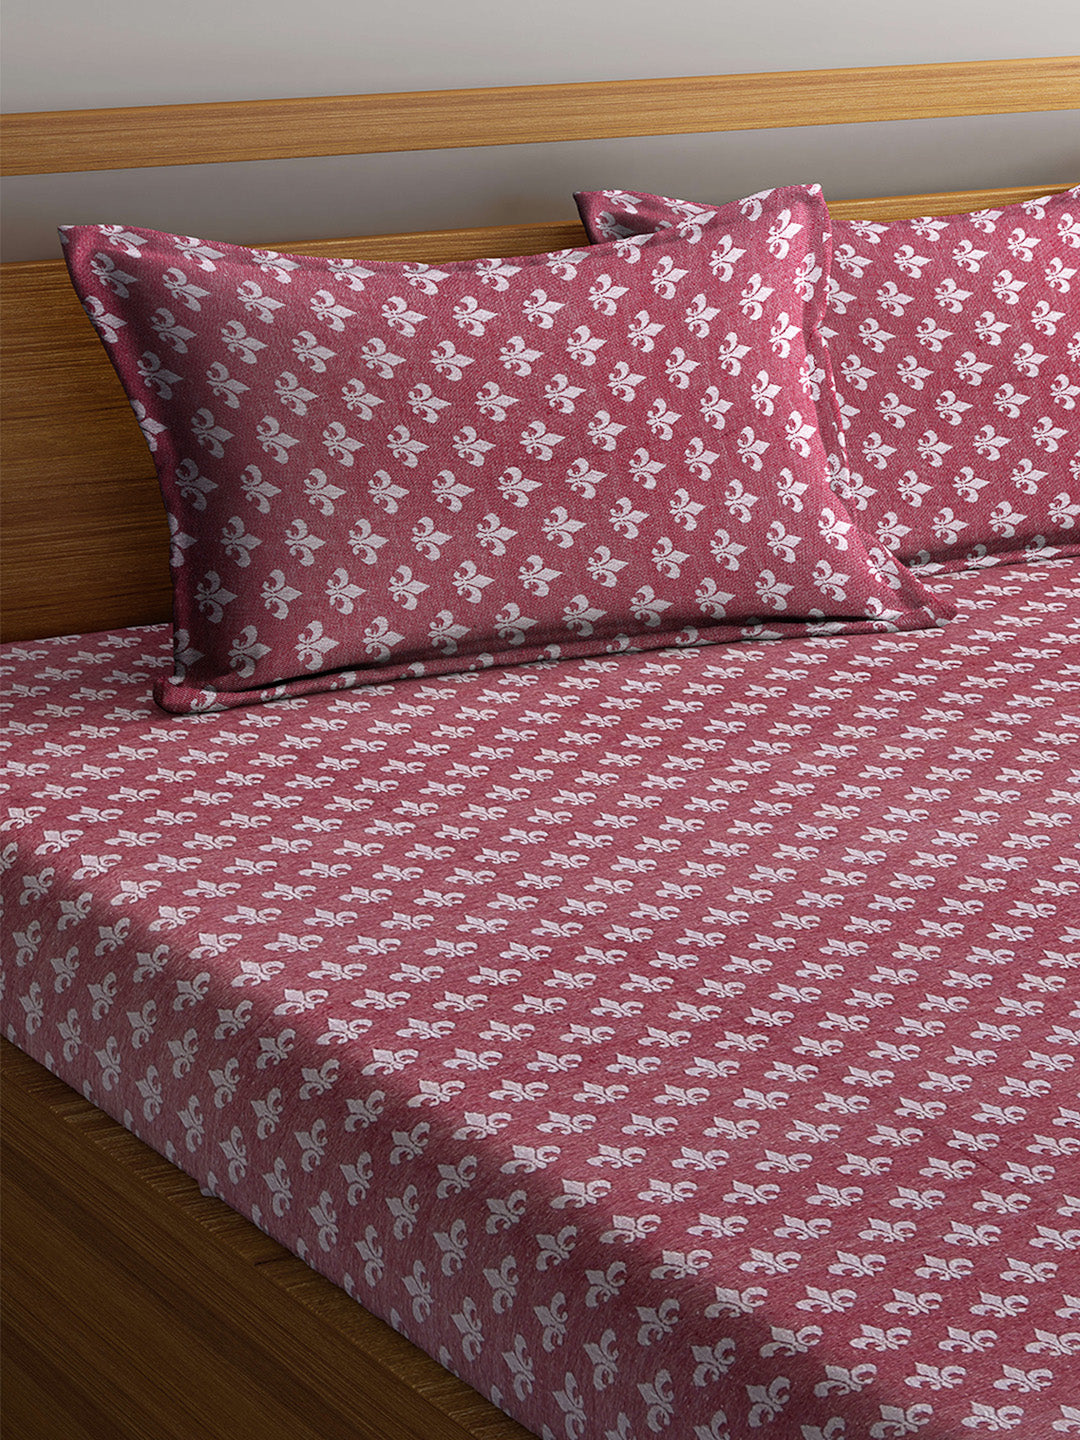 Arrabi Red Indian Handwoven Cotton Double Size Bedsheet with 2 Pillow Covers (260 x 230 cm)